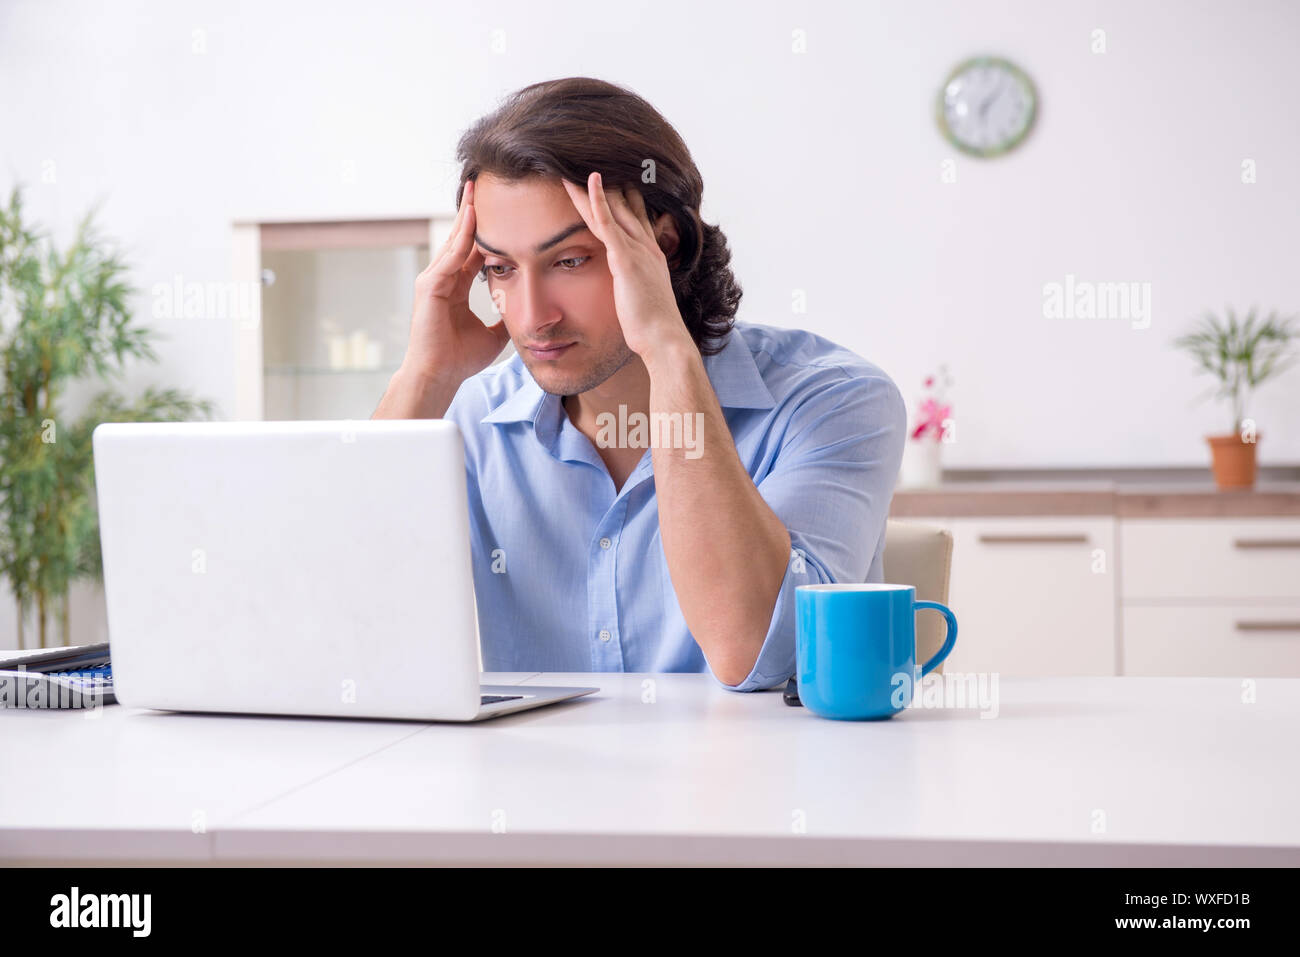 Young male employee working at home Stock Photo